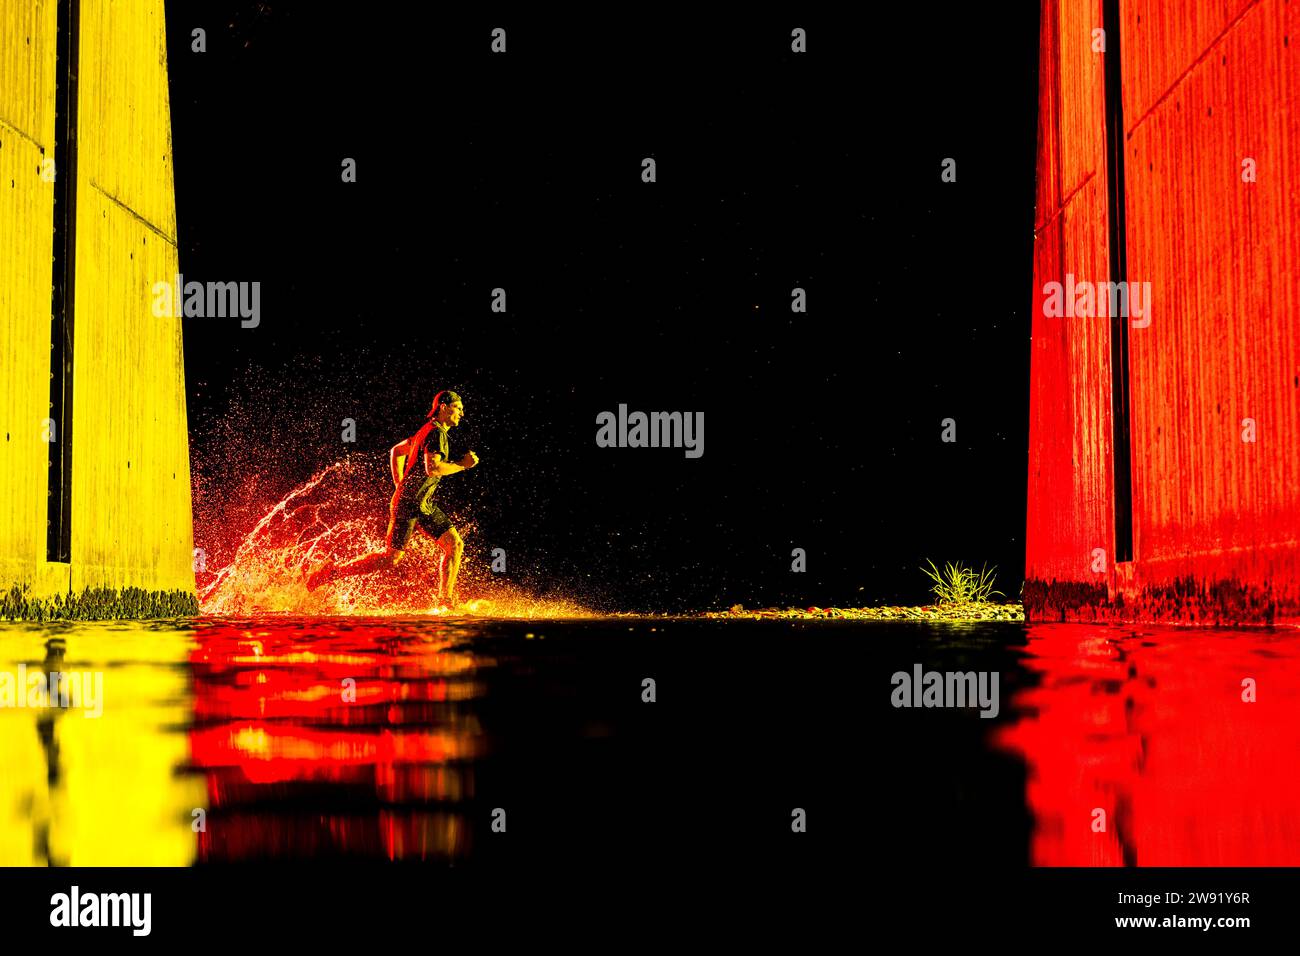 Young man running in river water with neon lights under bridge Stock Photo